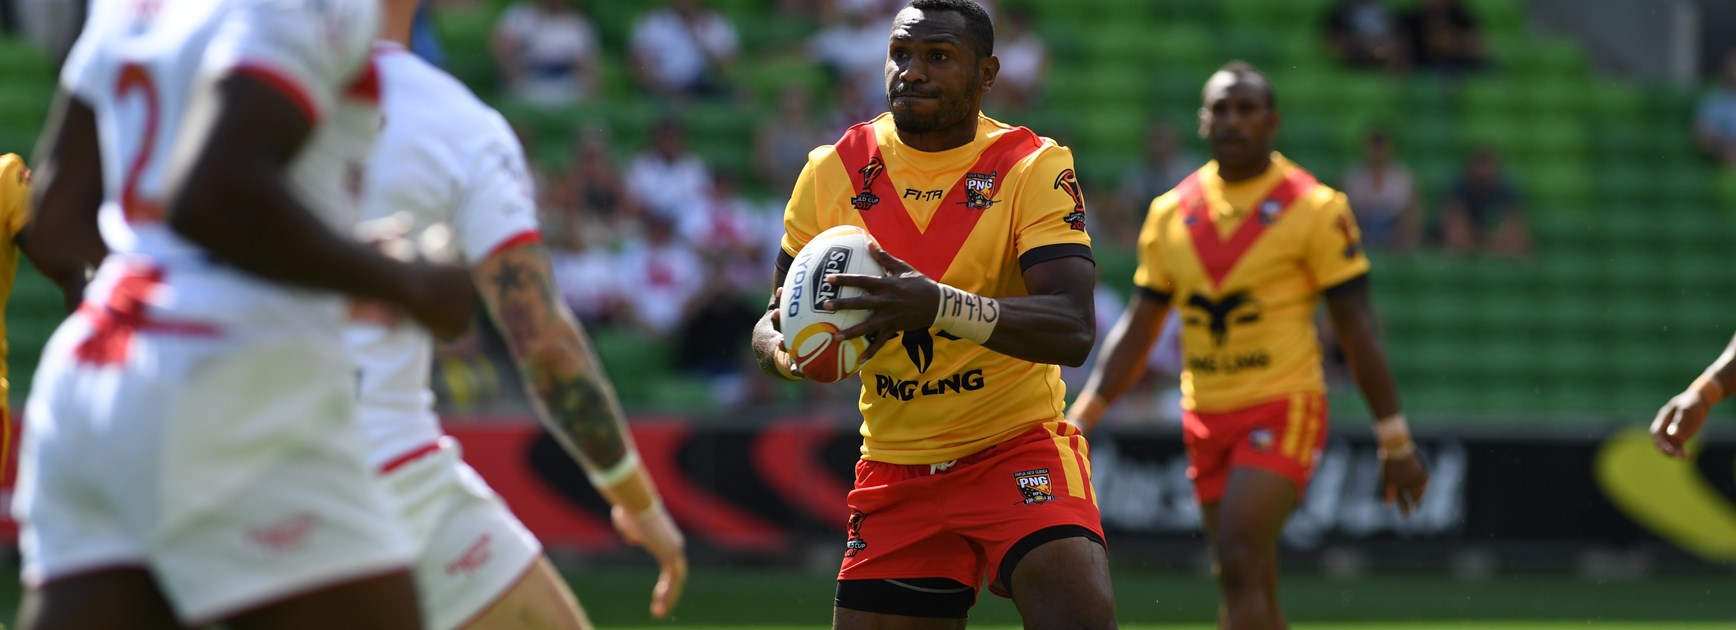 Kato Ottio in action for Papua New Guinea against England at the Rugby League World Cup.